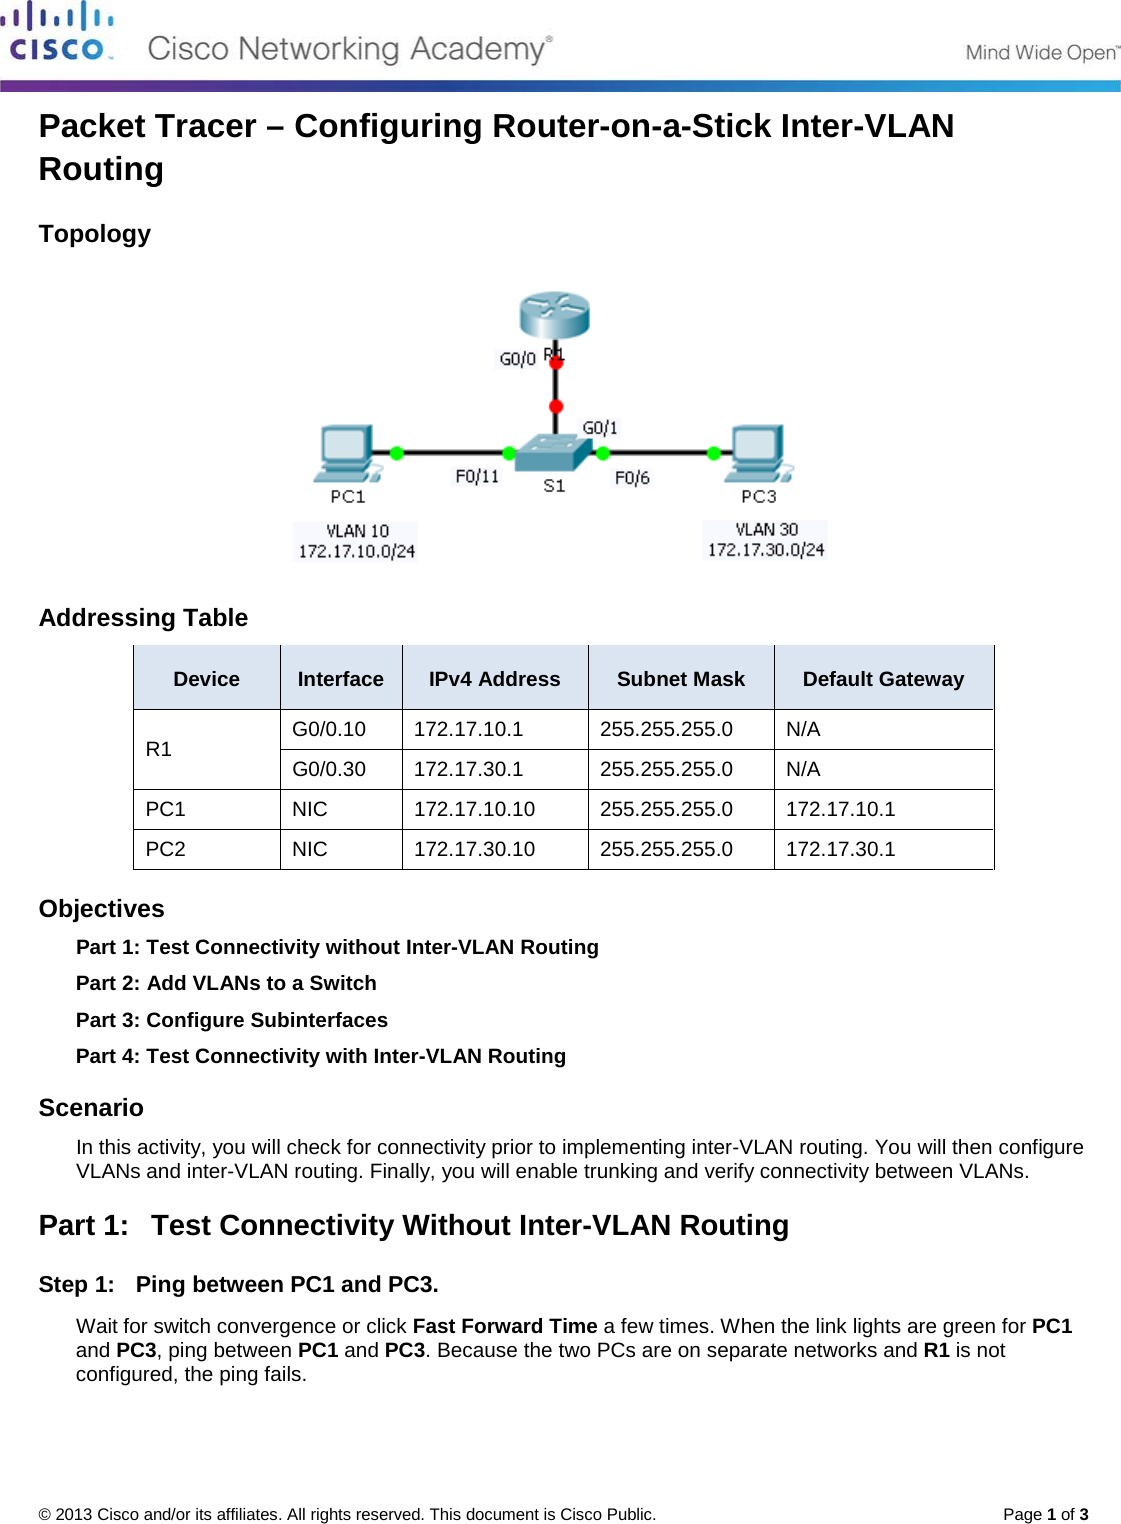 Packet Tracer Configuring Router On A Stick Inter Vlan Routing